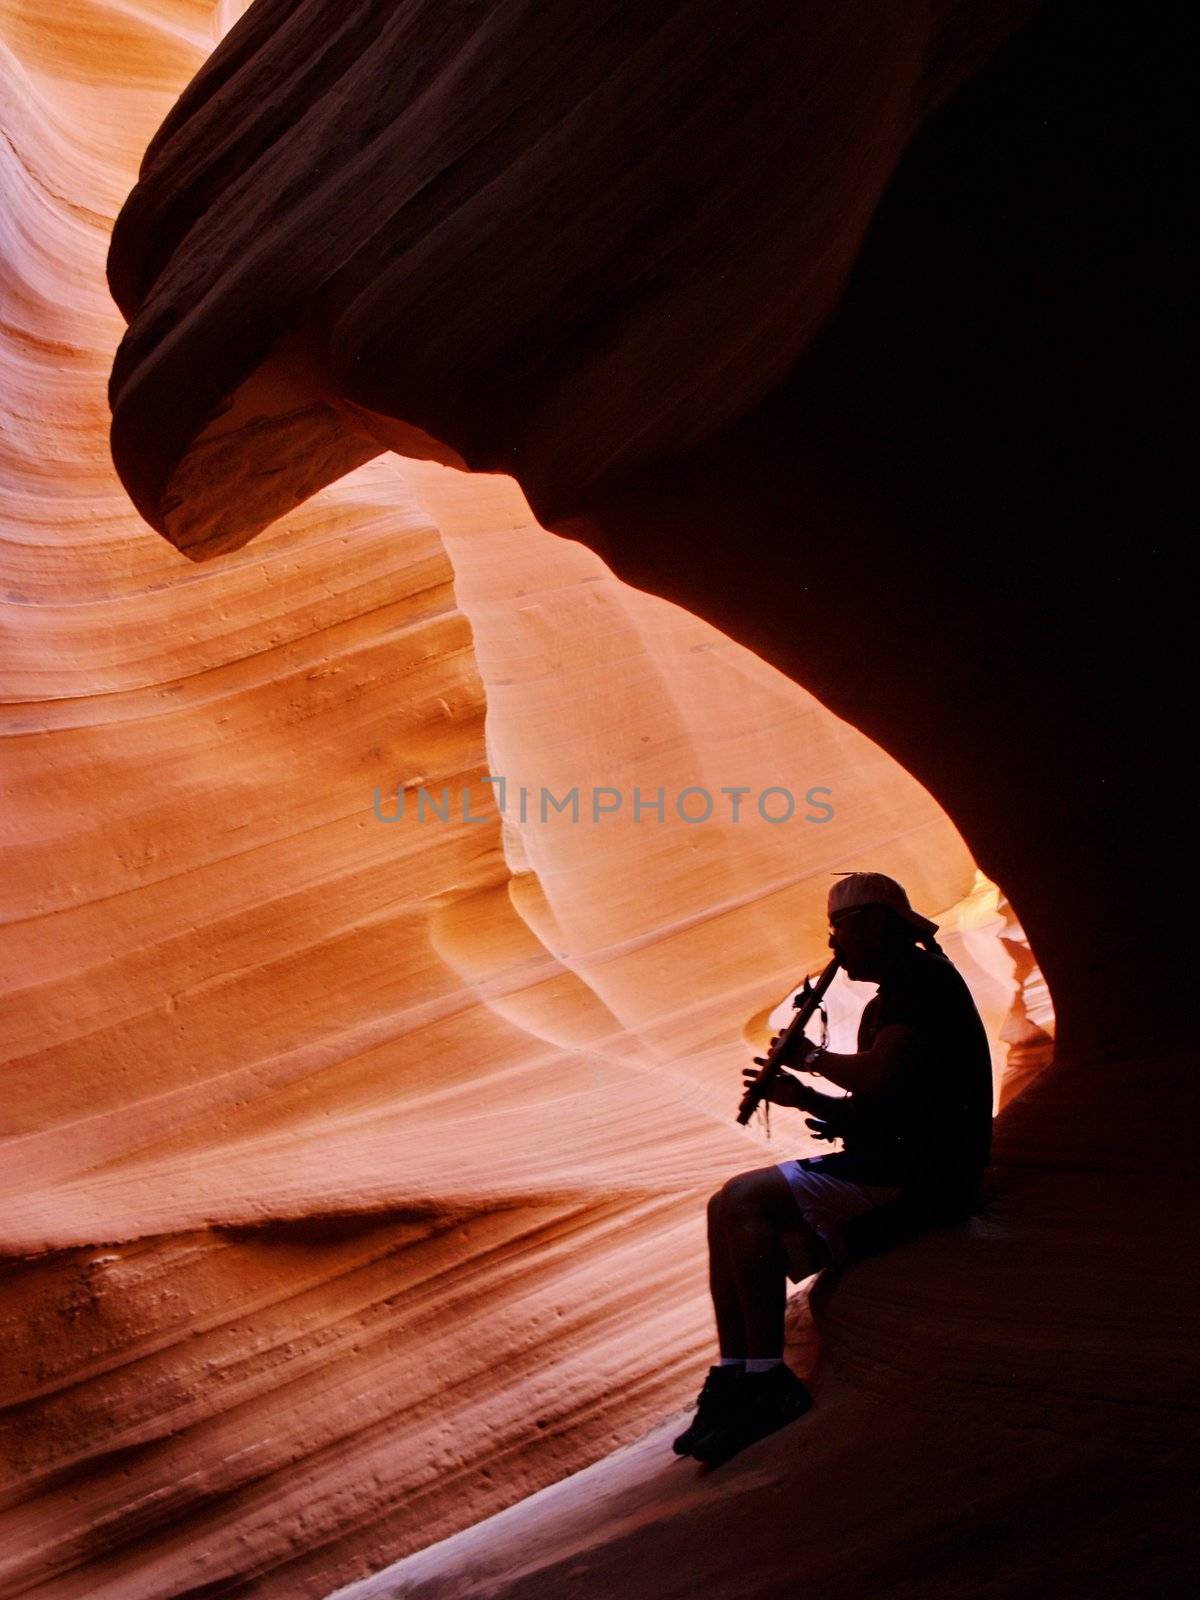 Navajo inidian playin on flute in Antelope Canyon